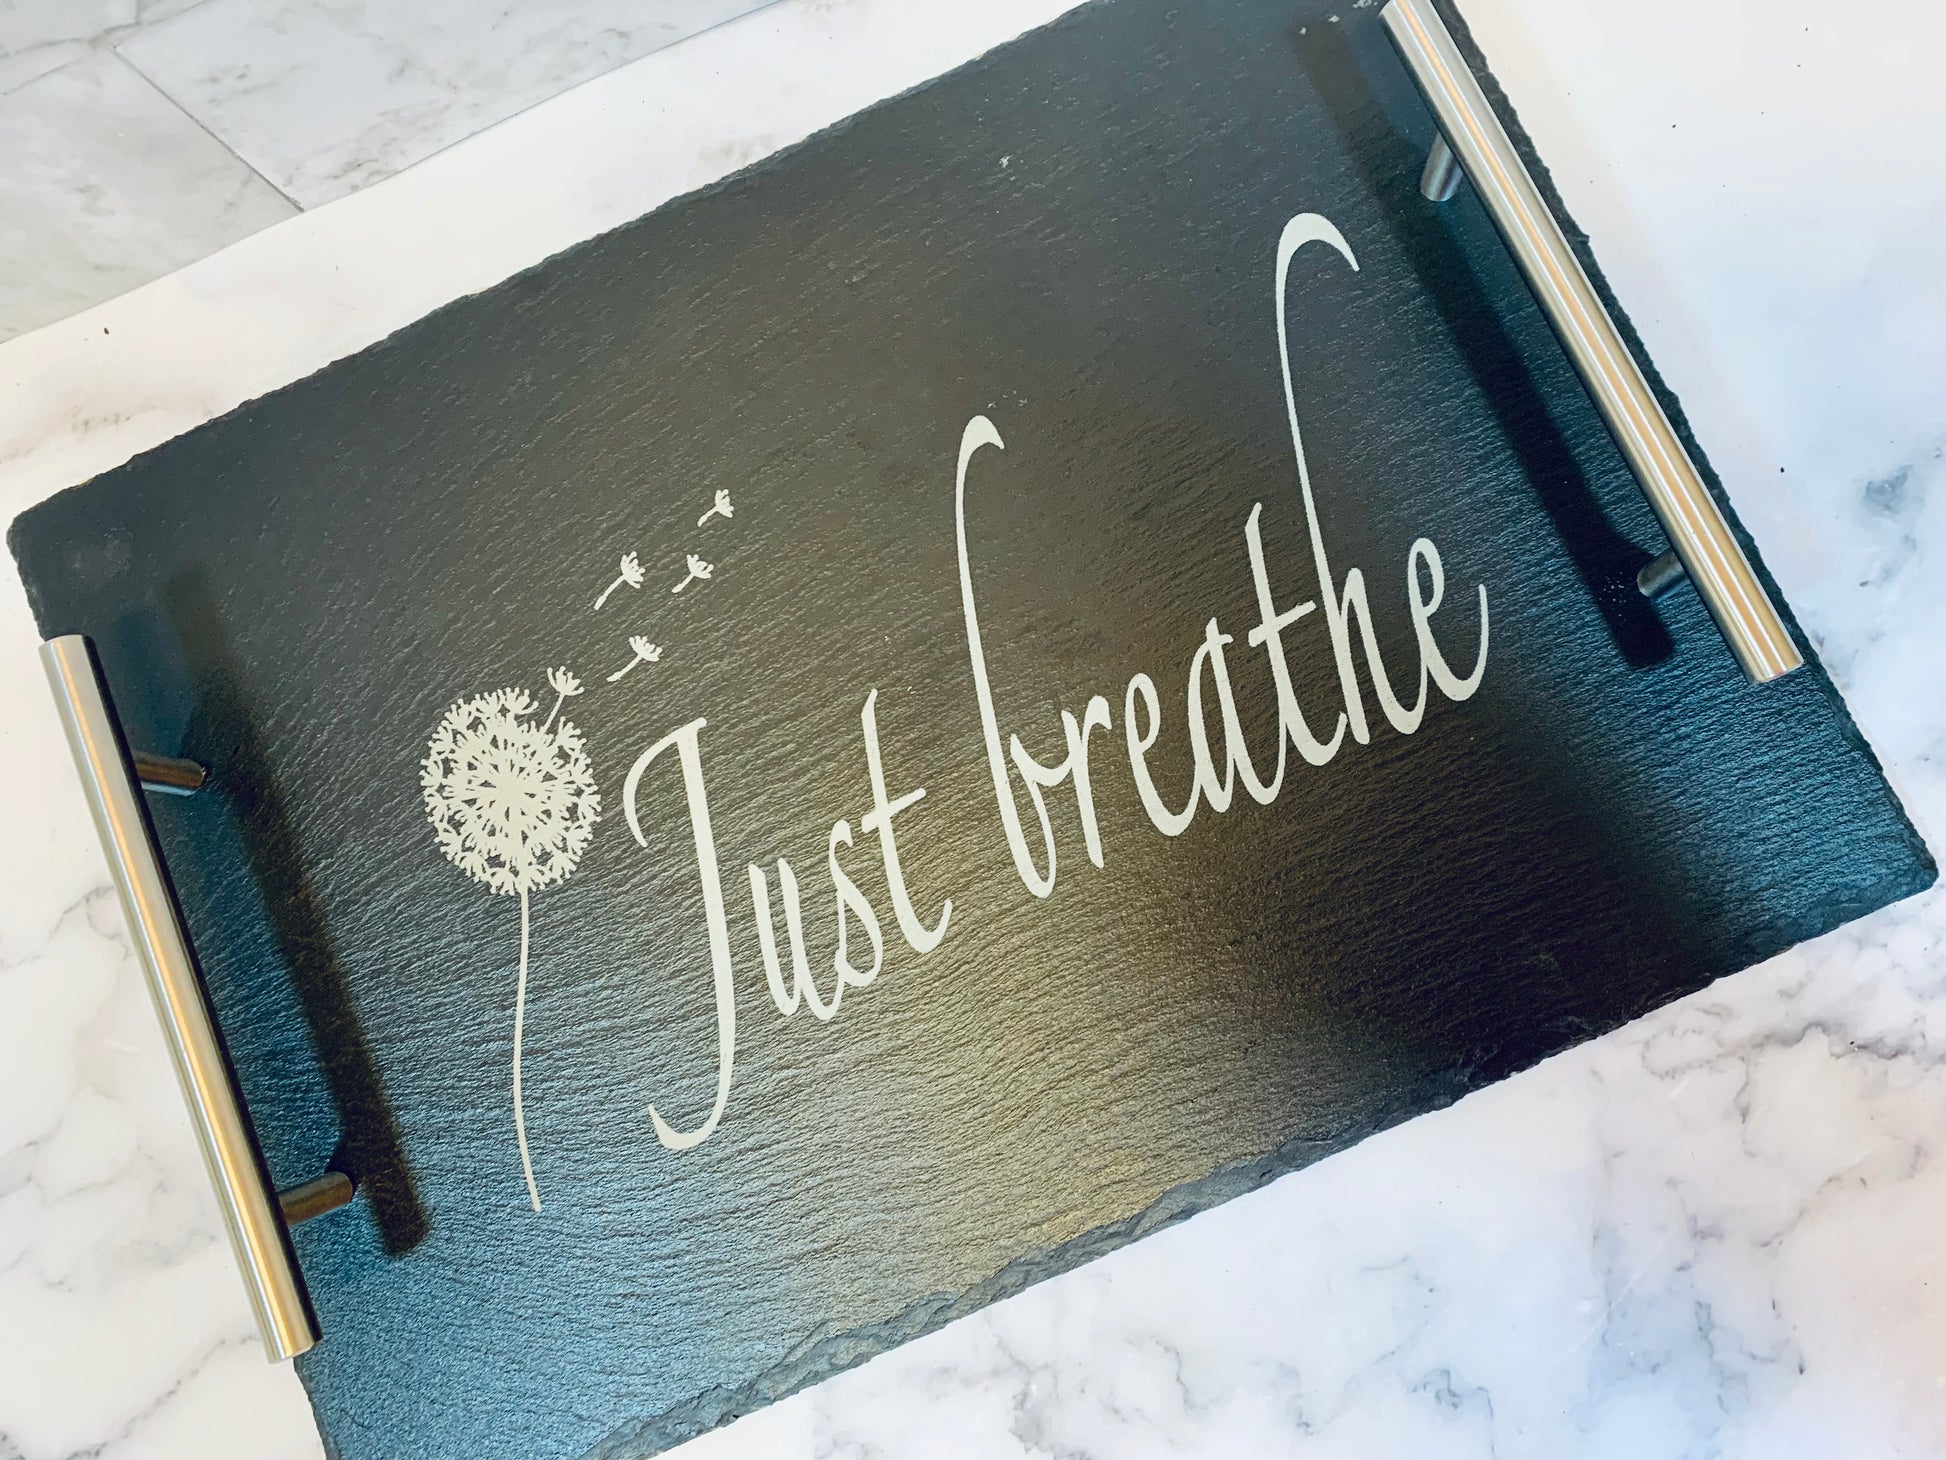 Just Breathe Slate Tray - MixMatched Creations